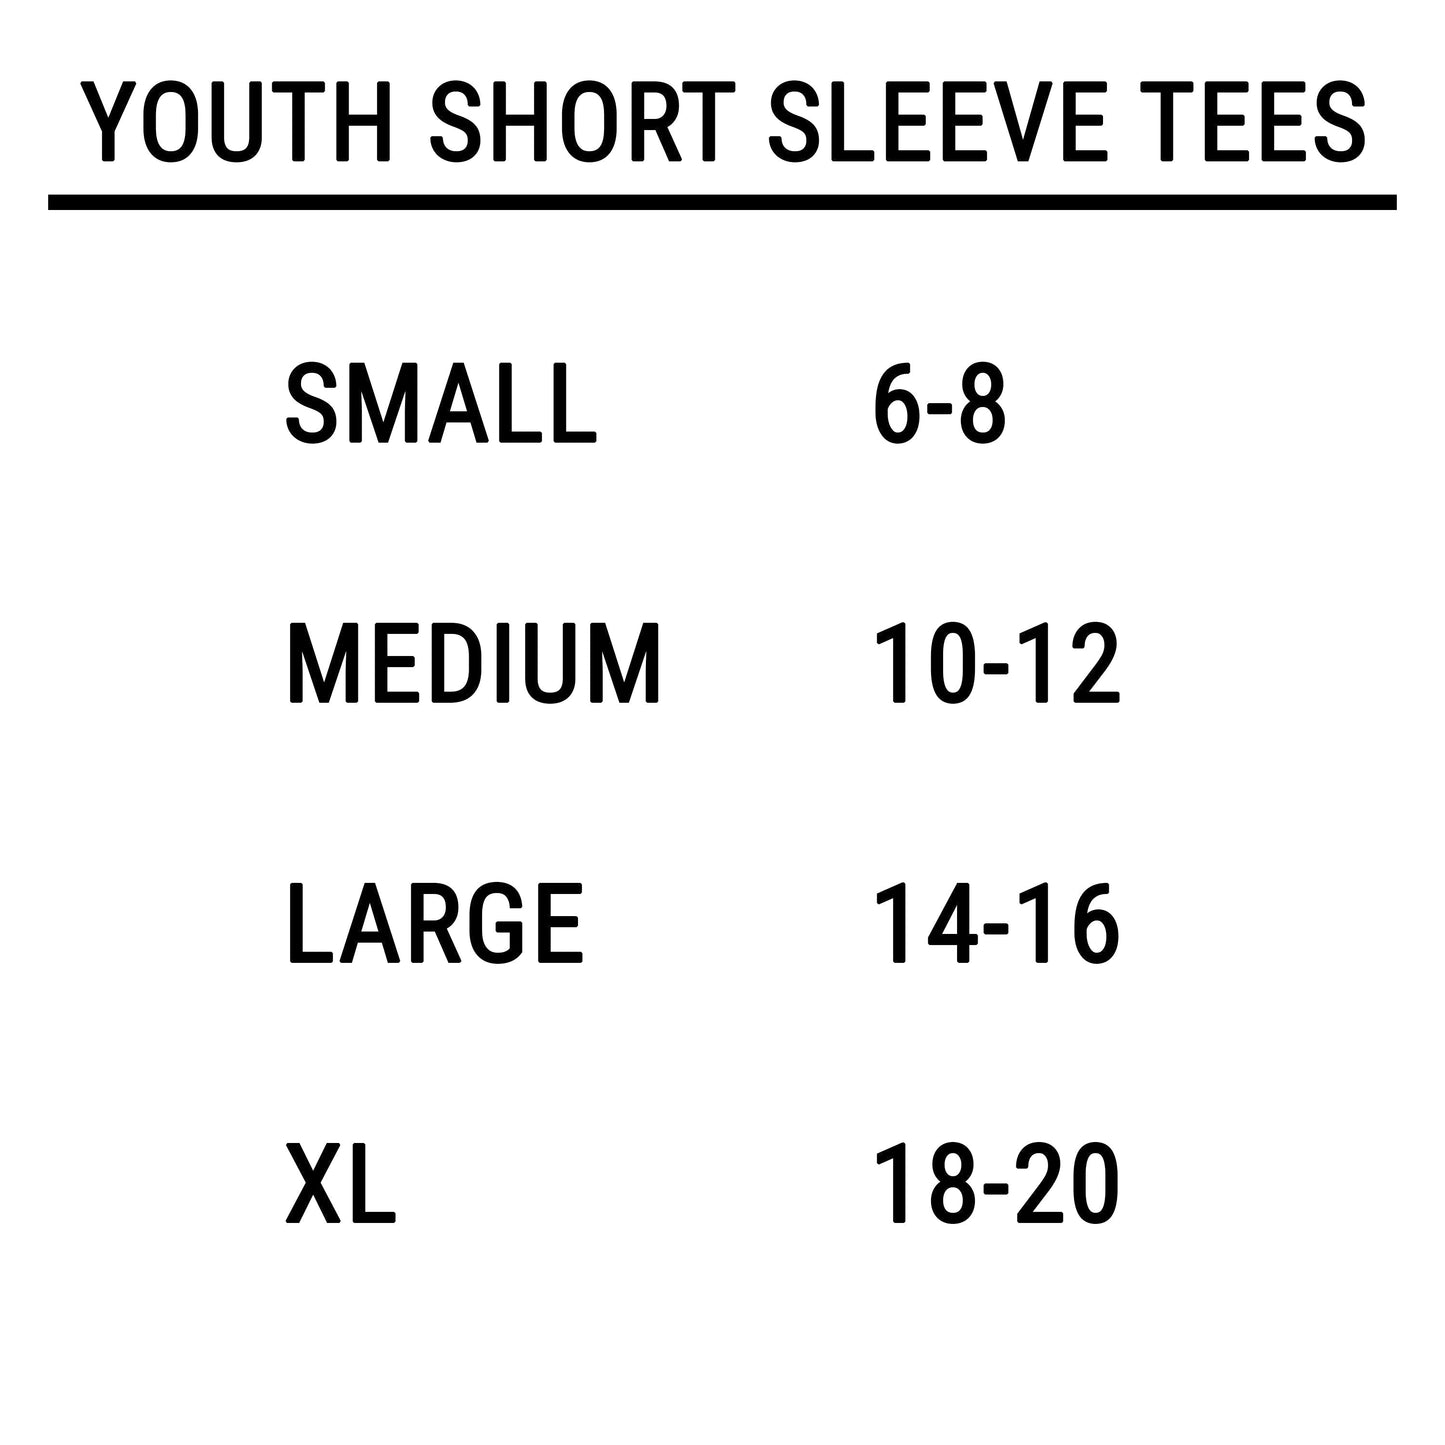 Game Day Stars | Youth Short Sleeve Crew Neck